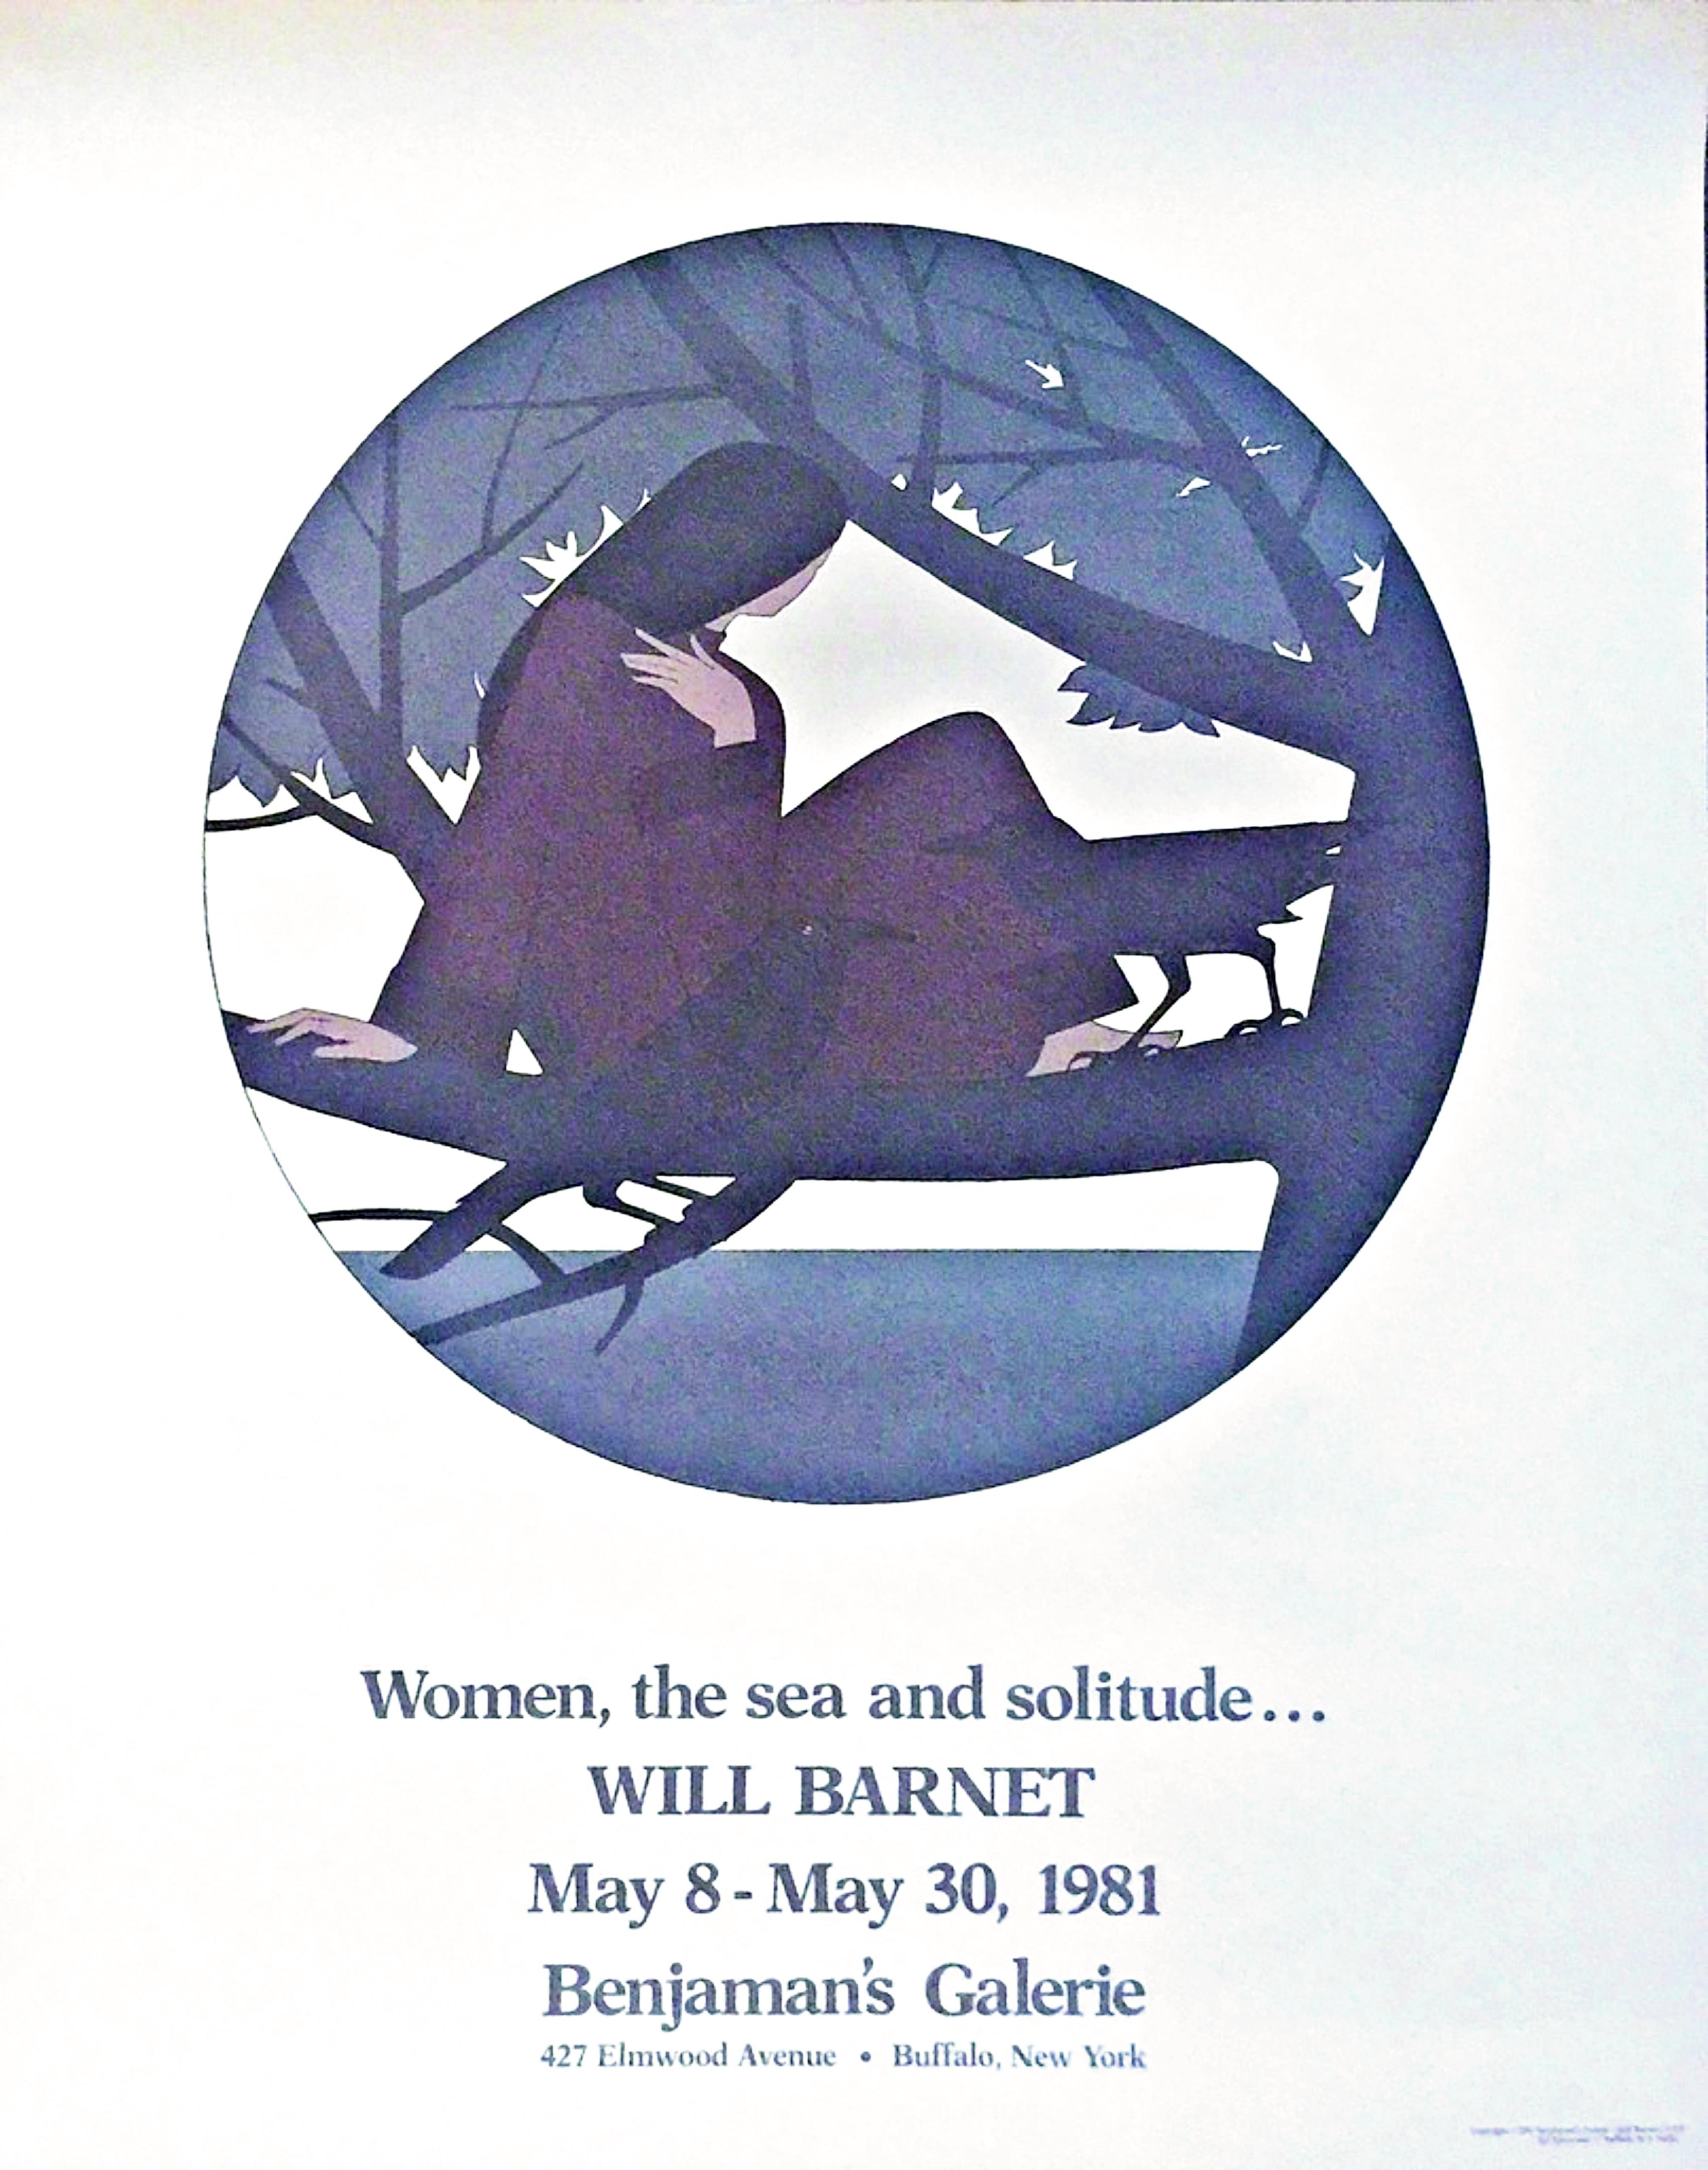 Women The Sea and Solitude - offset lithograph poster